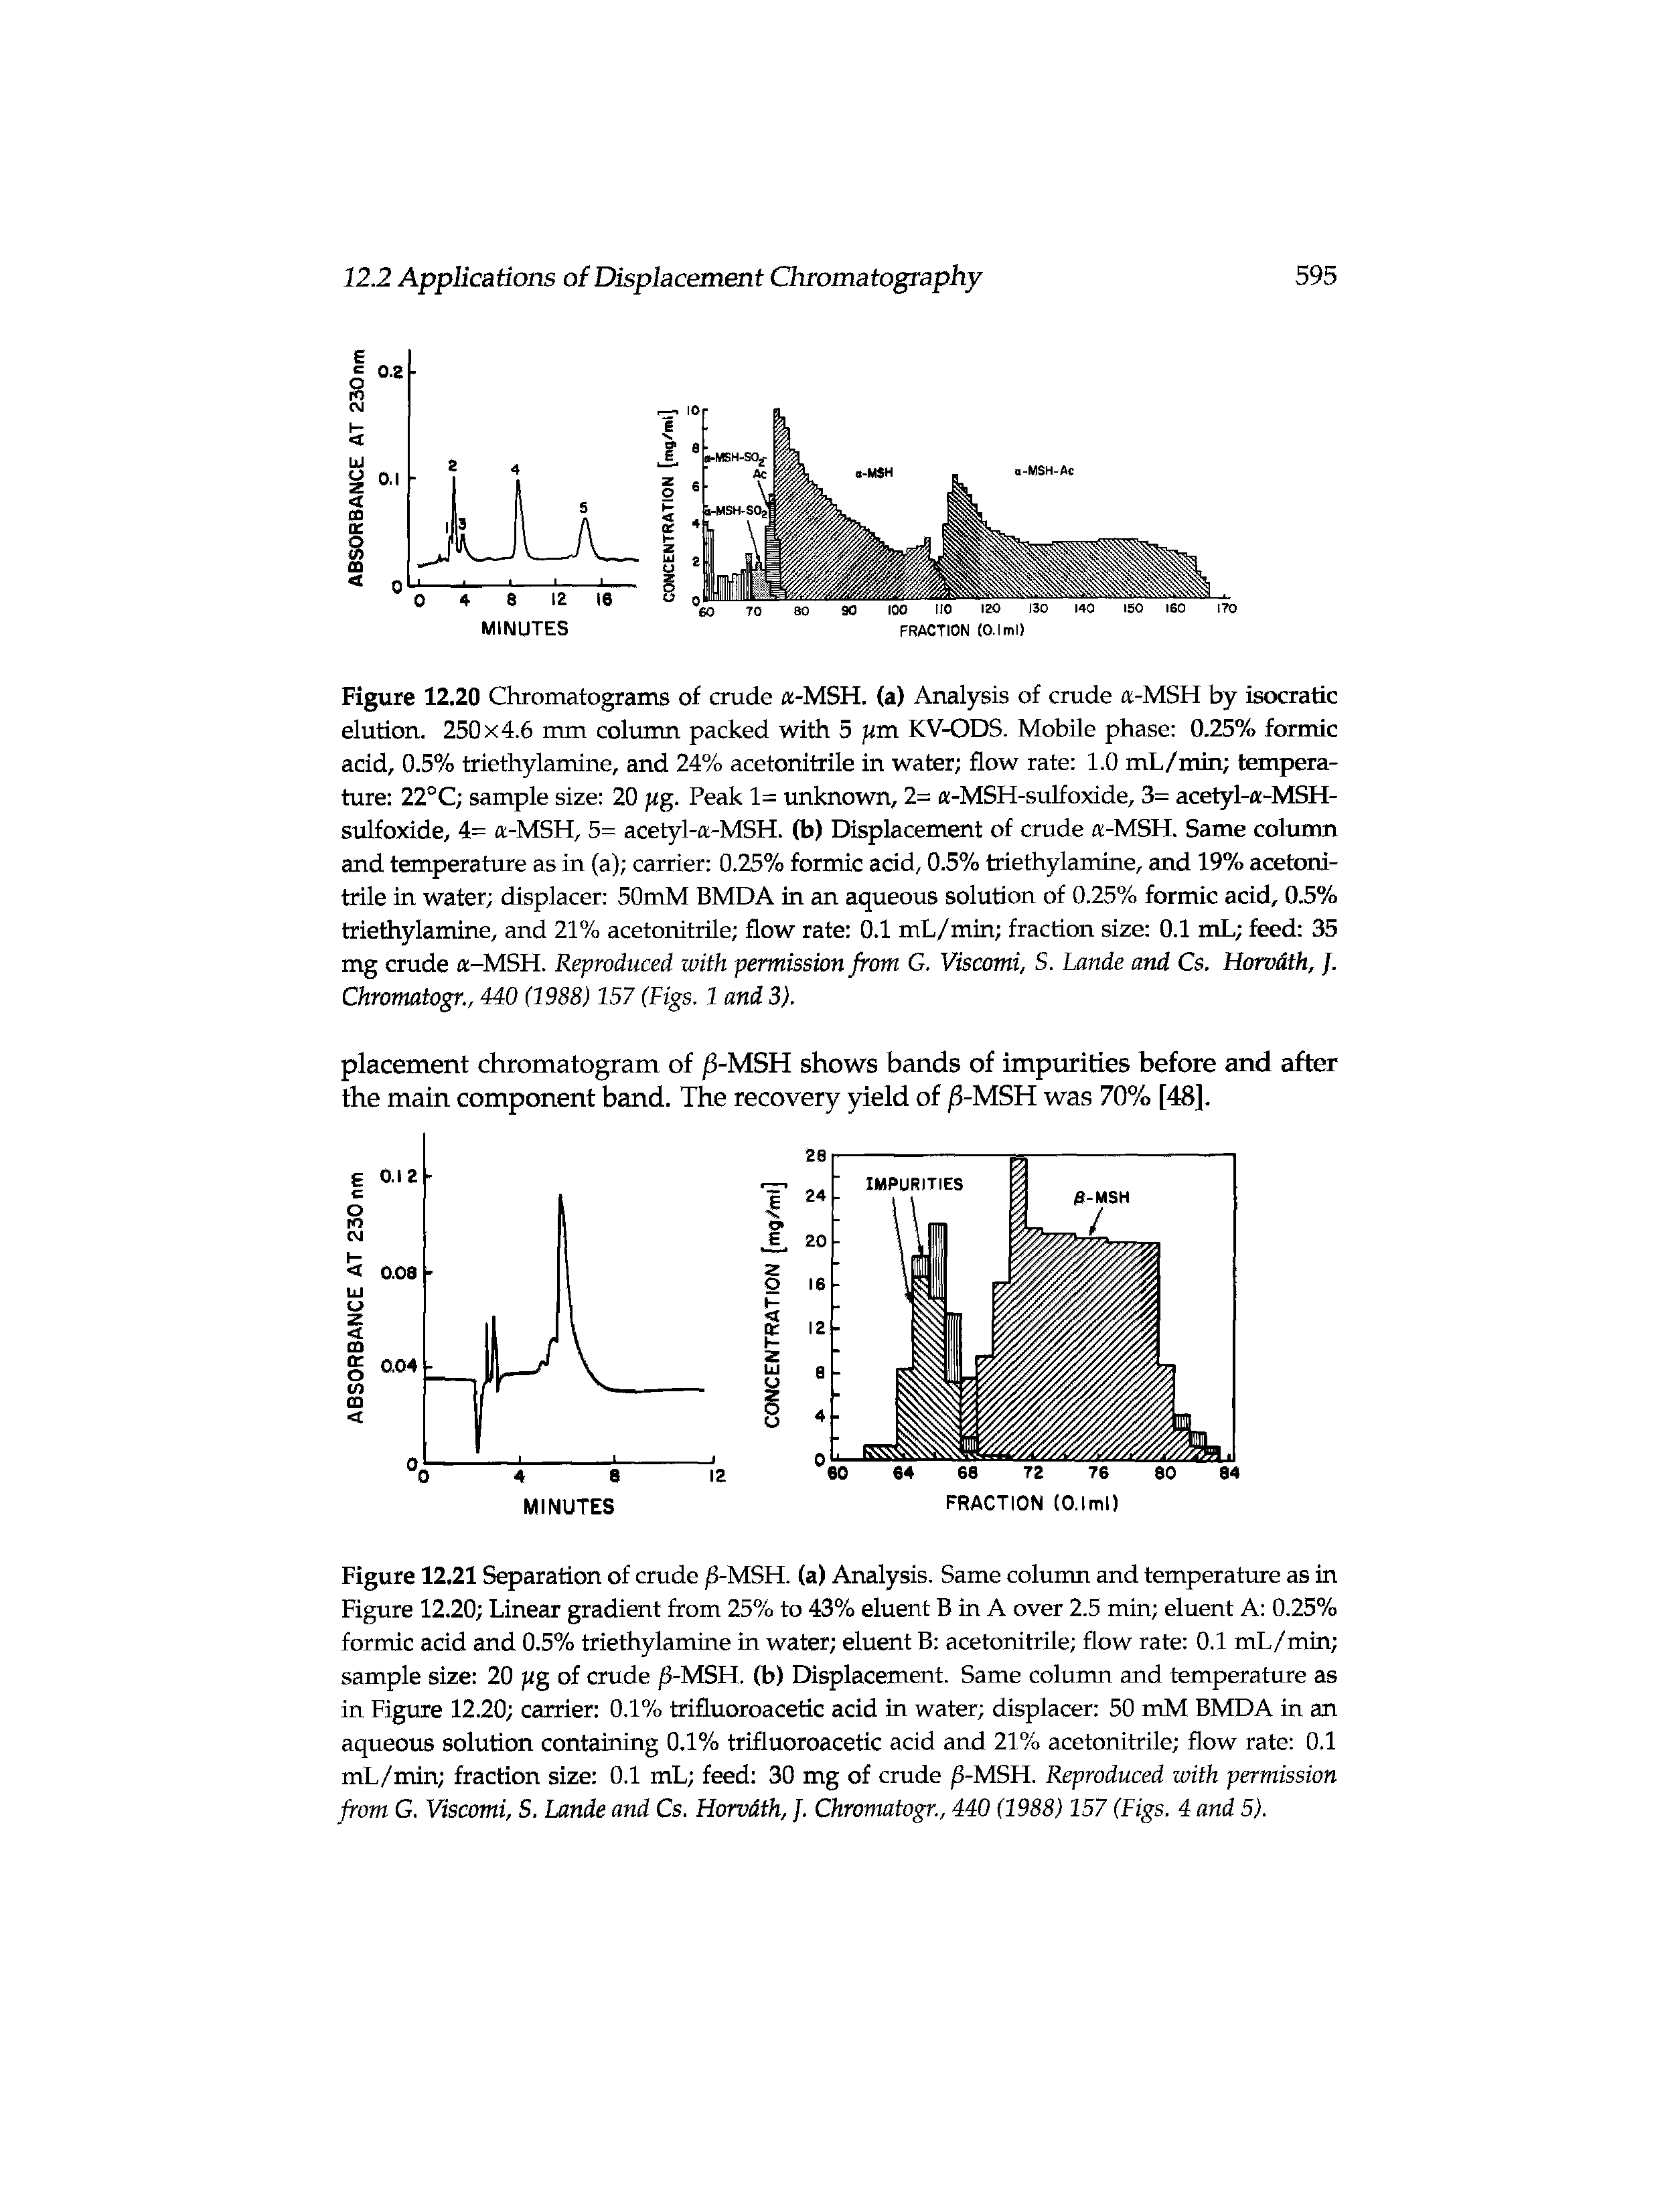 Figure 12.21 Separation of crude /5-MSH. (a) Analysis. Same column and temperature as in Figure 12.20 Linear gradient from 25% to 43% eluent B in A over 2.5 min eluent A 0.25% formic acid and 0.5% triethylamine in water eluent B acetonitrile flow rate 0.1 mL/min sample size 20 jig of crude /5-MSH. (b) Displacement. Same column and temperature as in Figure 12.20 carrier 0.1% trifluoroacetic acid in water displacer 50 mM BMDA in an aqueous solution containing 0.1% trifluoroacetic acid and 21% acetonitrile flow rate 0.1 mL/min fraction size 0.1 mL feed 30 mg of crude /1-MSH. Reproduced with permission from G. Viscomi, S. Lande and Cs. Horvdth, J. Chromatogr., 440 (1988) 157 (Figs. 4 and 5).